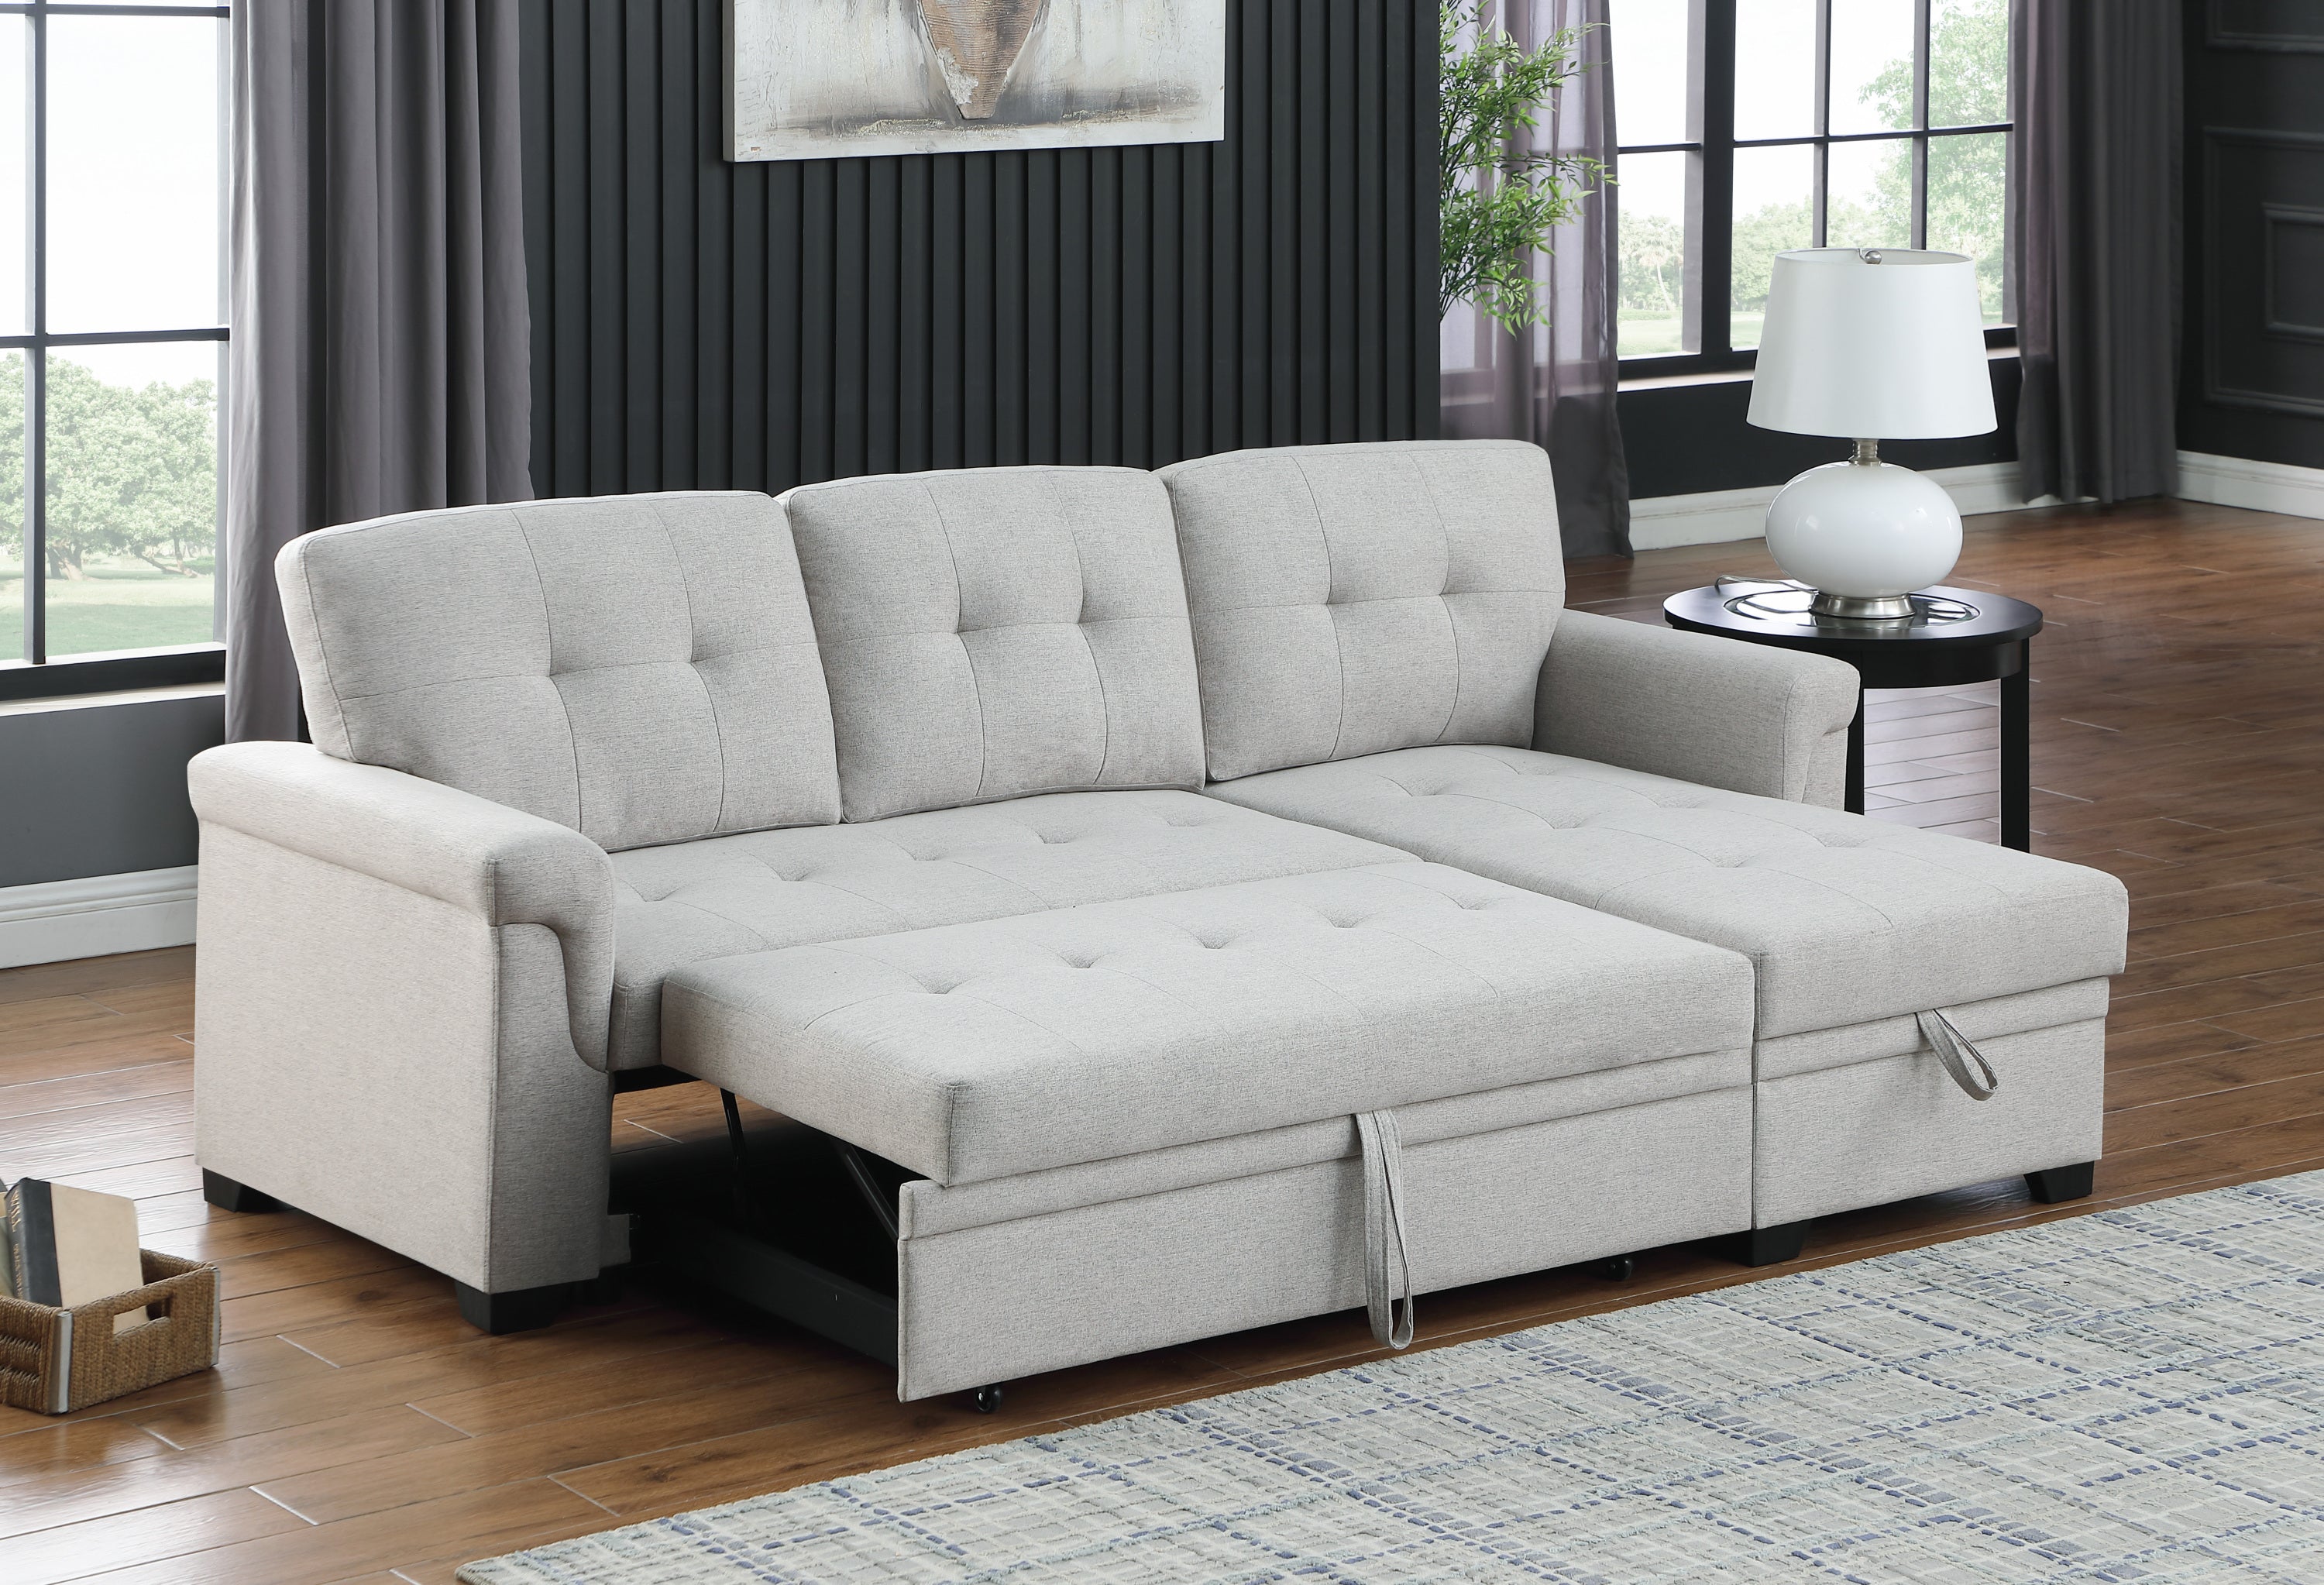 Lucca 84" Light Gray Linen Reversible Sleeper Sectional Sofa with Storage Chaise | Stylish and Functional Addition to Your Living Space-Sleeper Sectionals-American Furniture Outlet